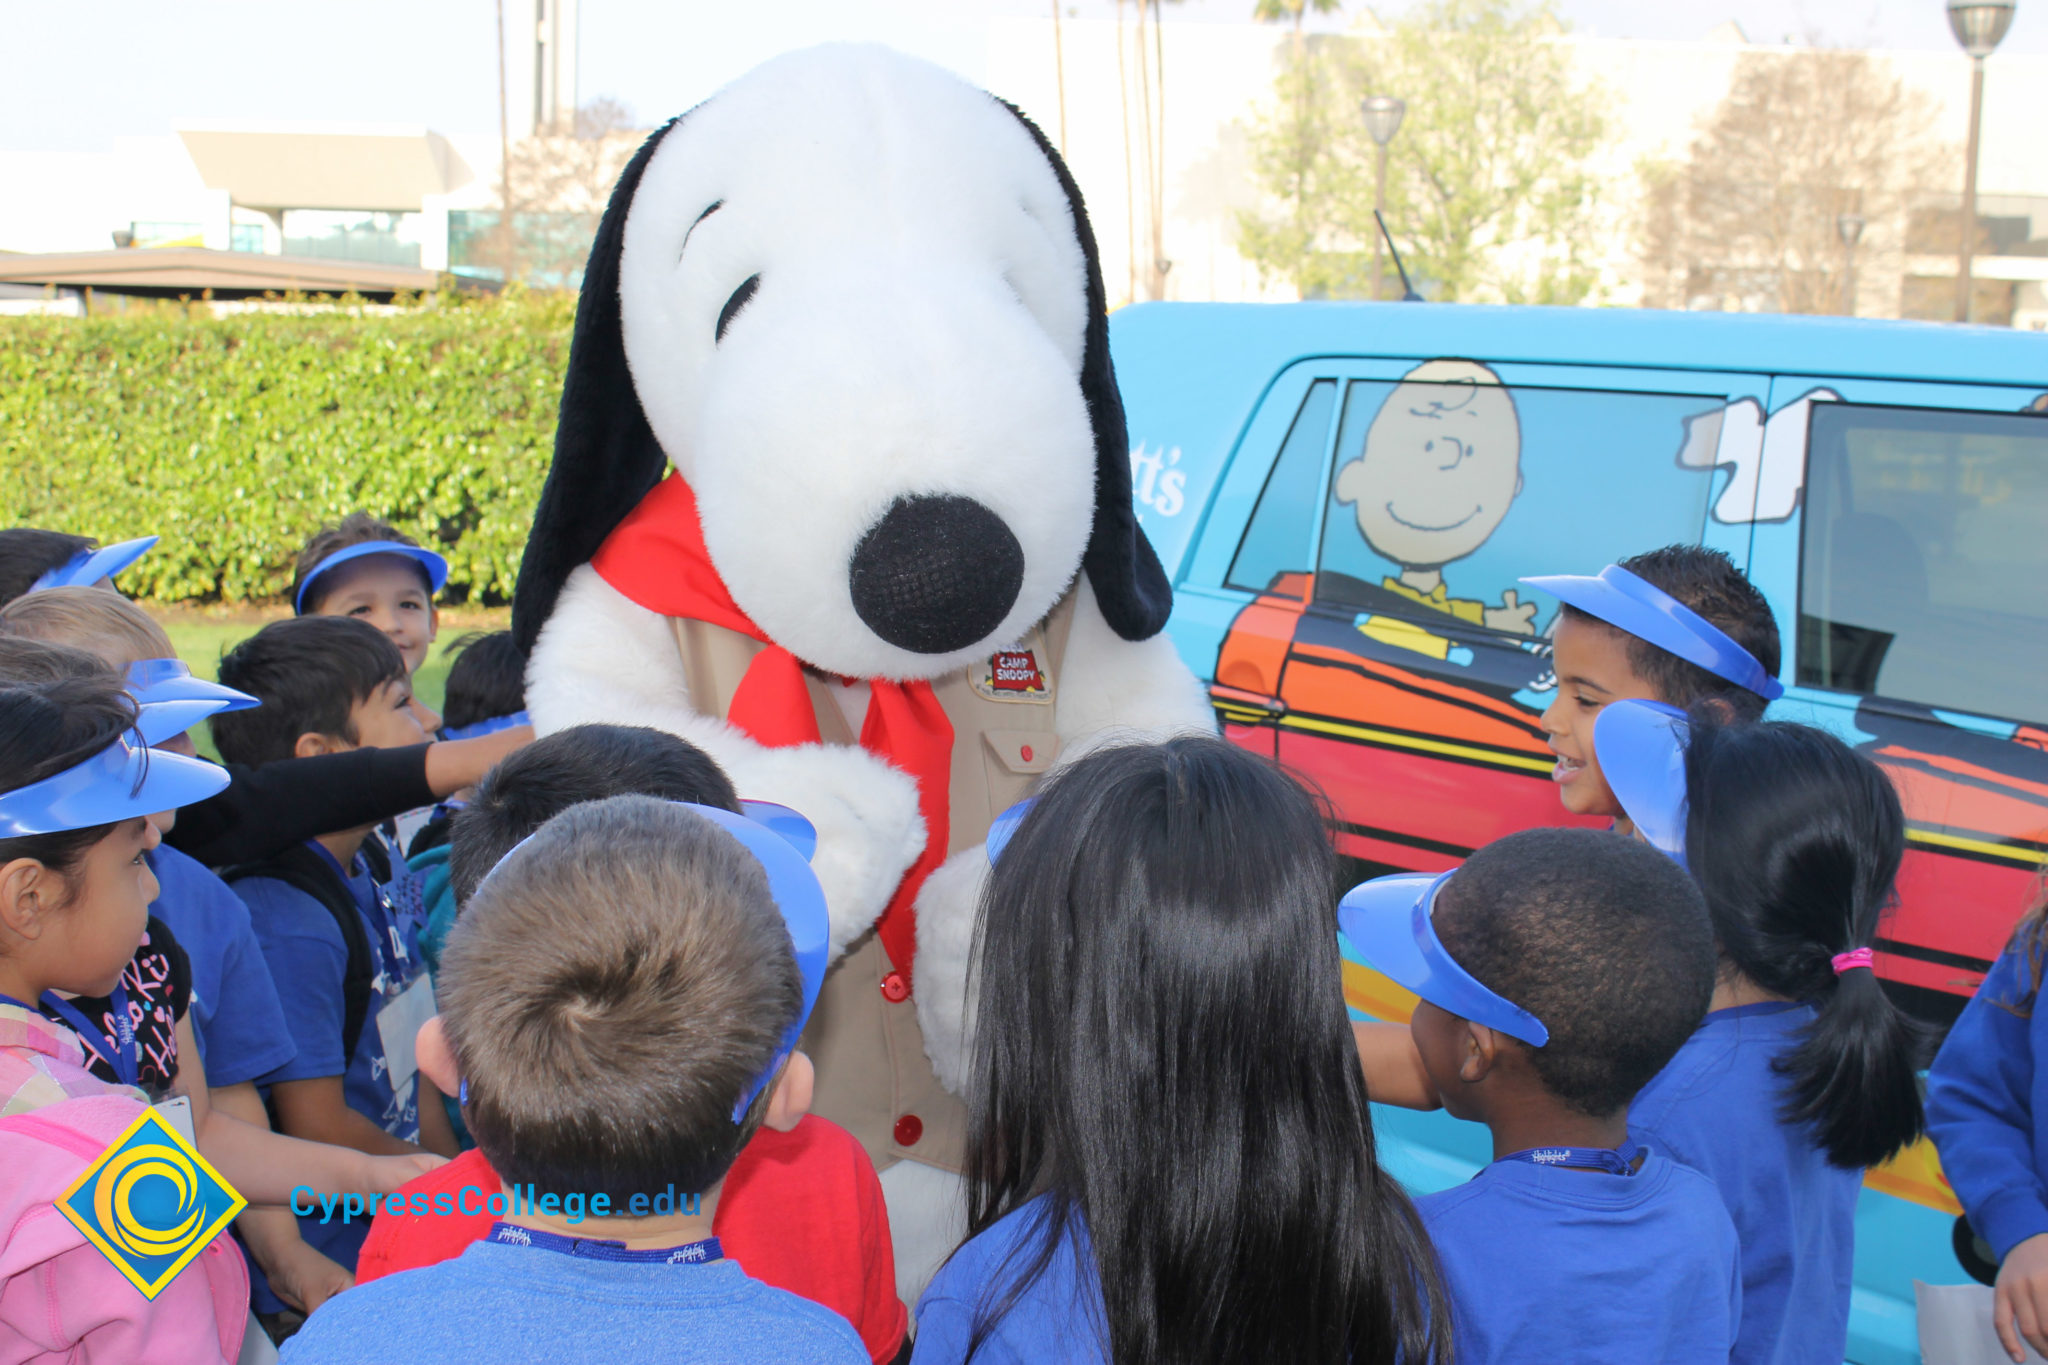 Snoopy with a group of young children.